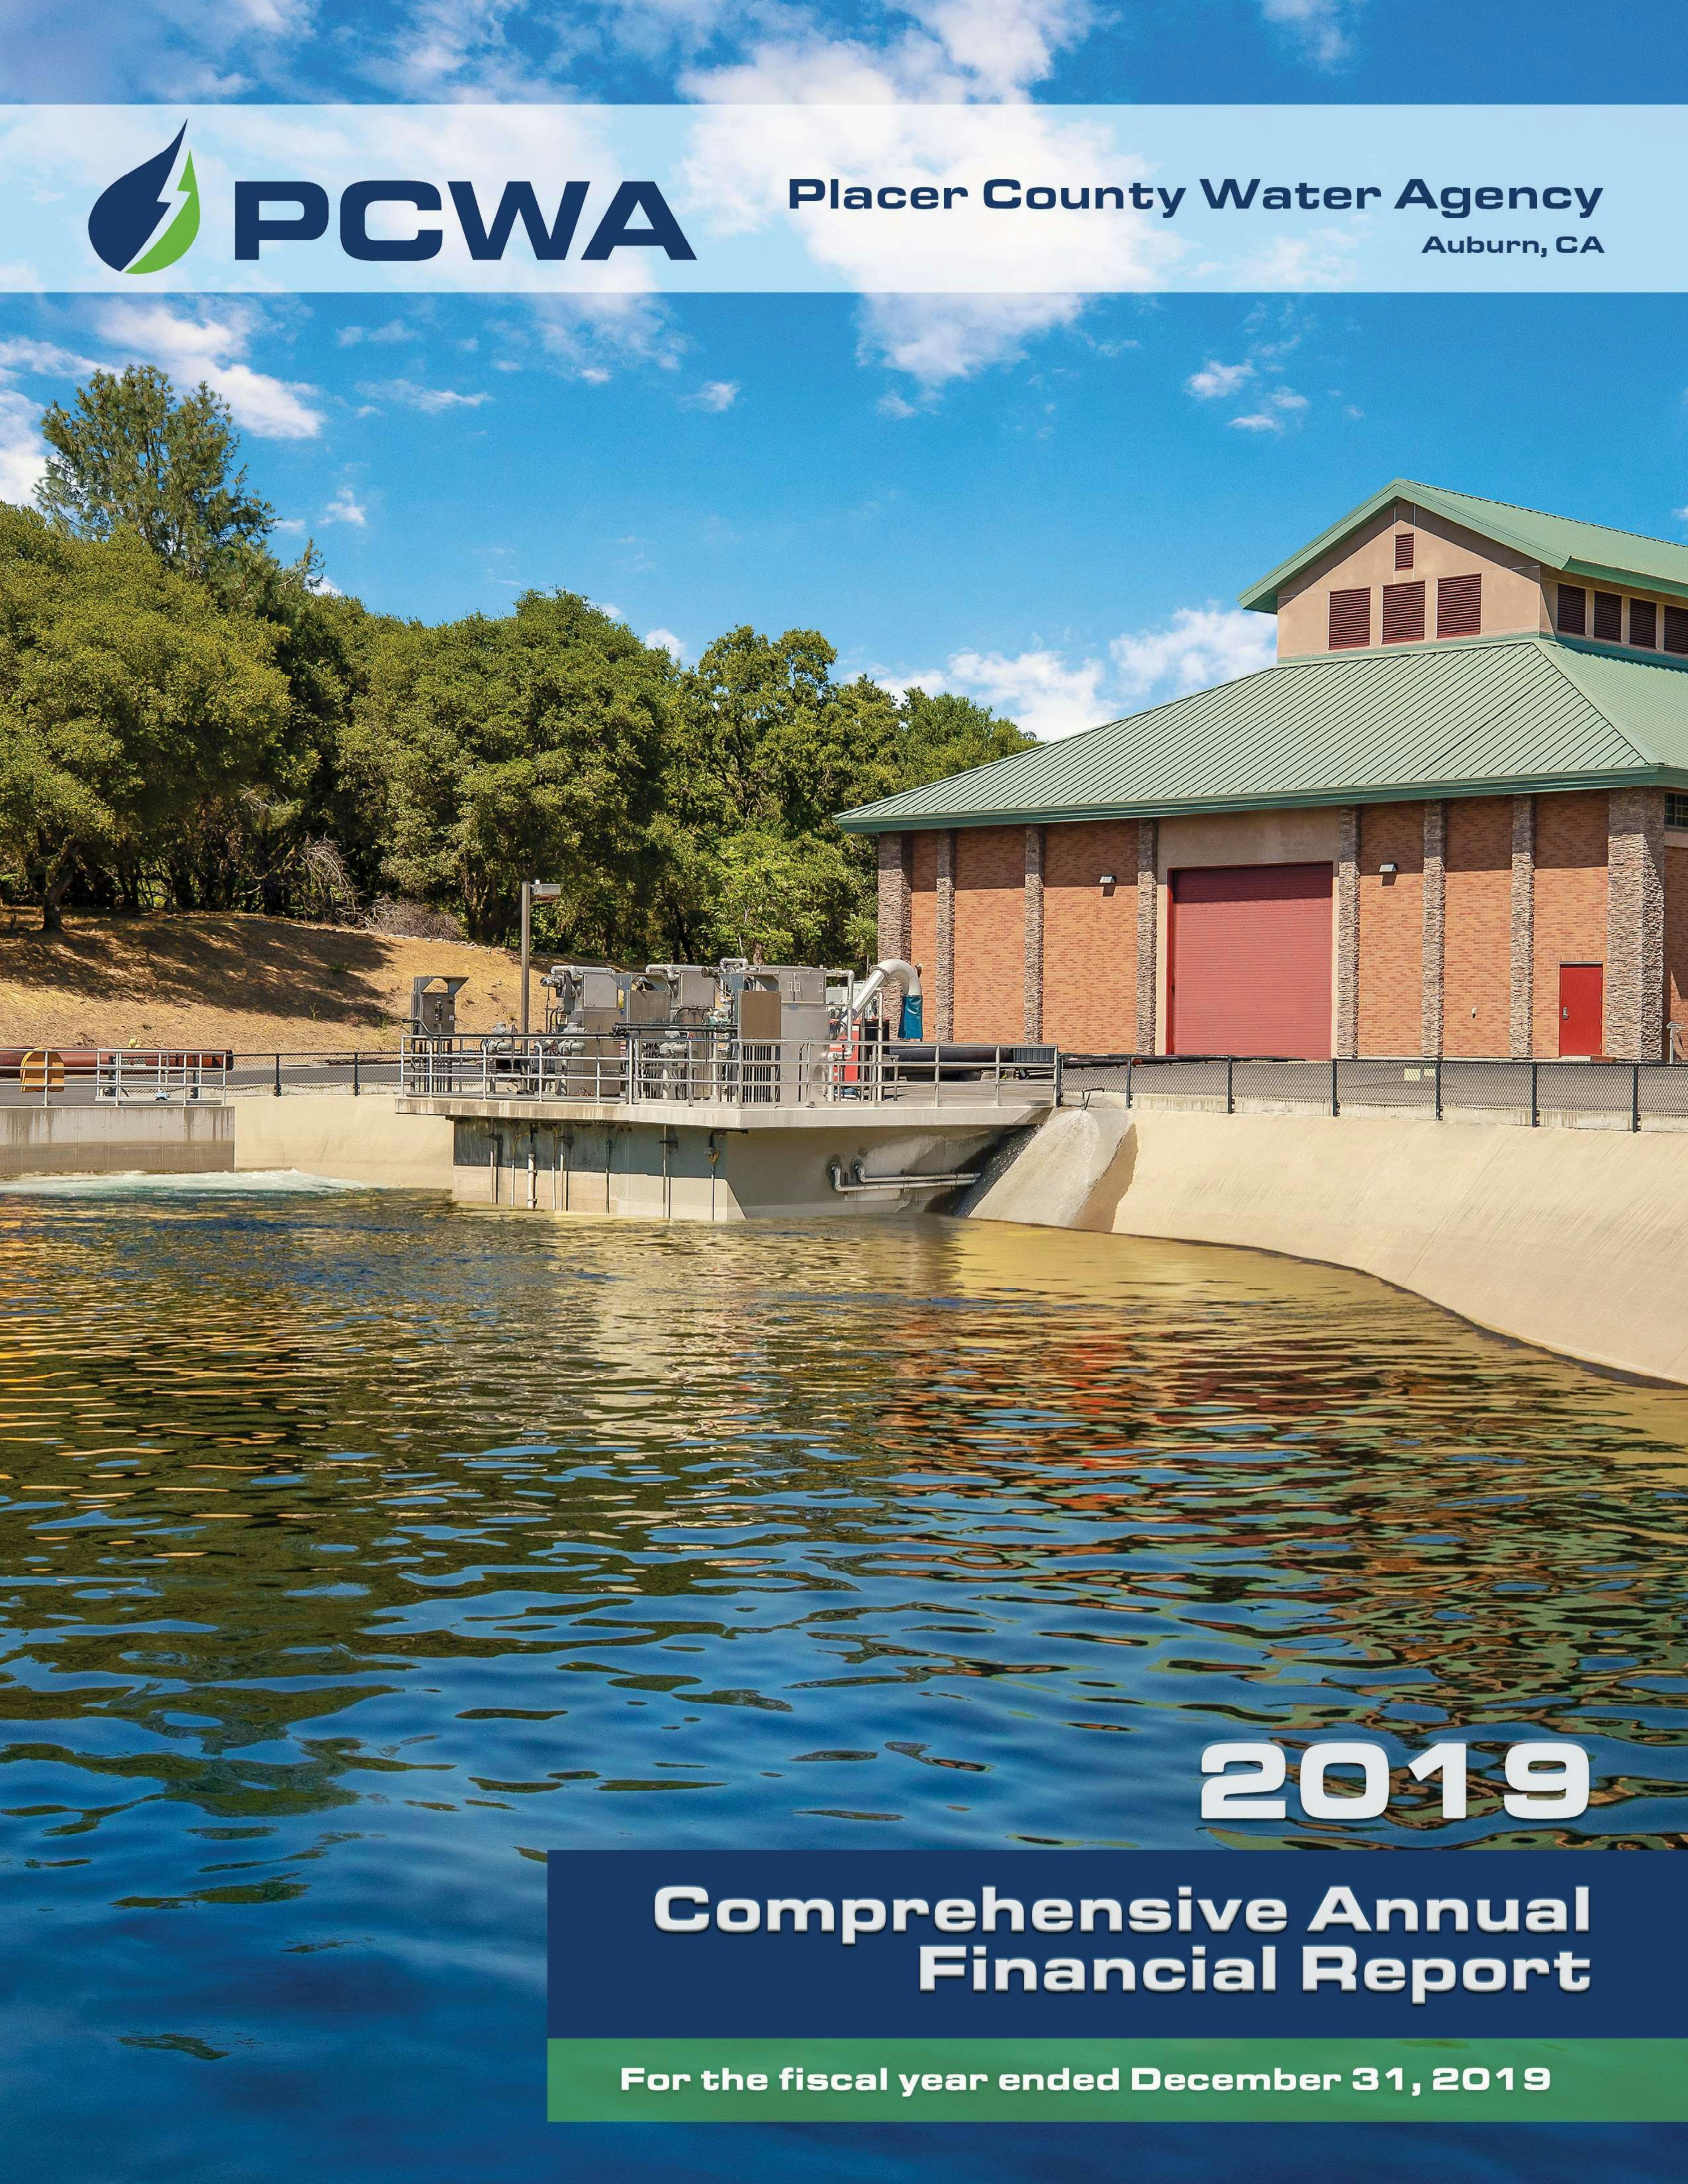 Annual Report Thumbnail and link for 2019 PCWA Annual Report pdf